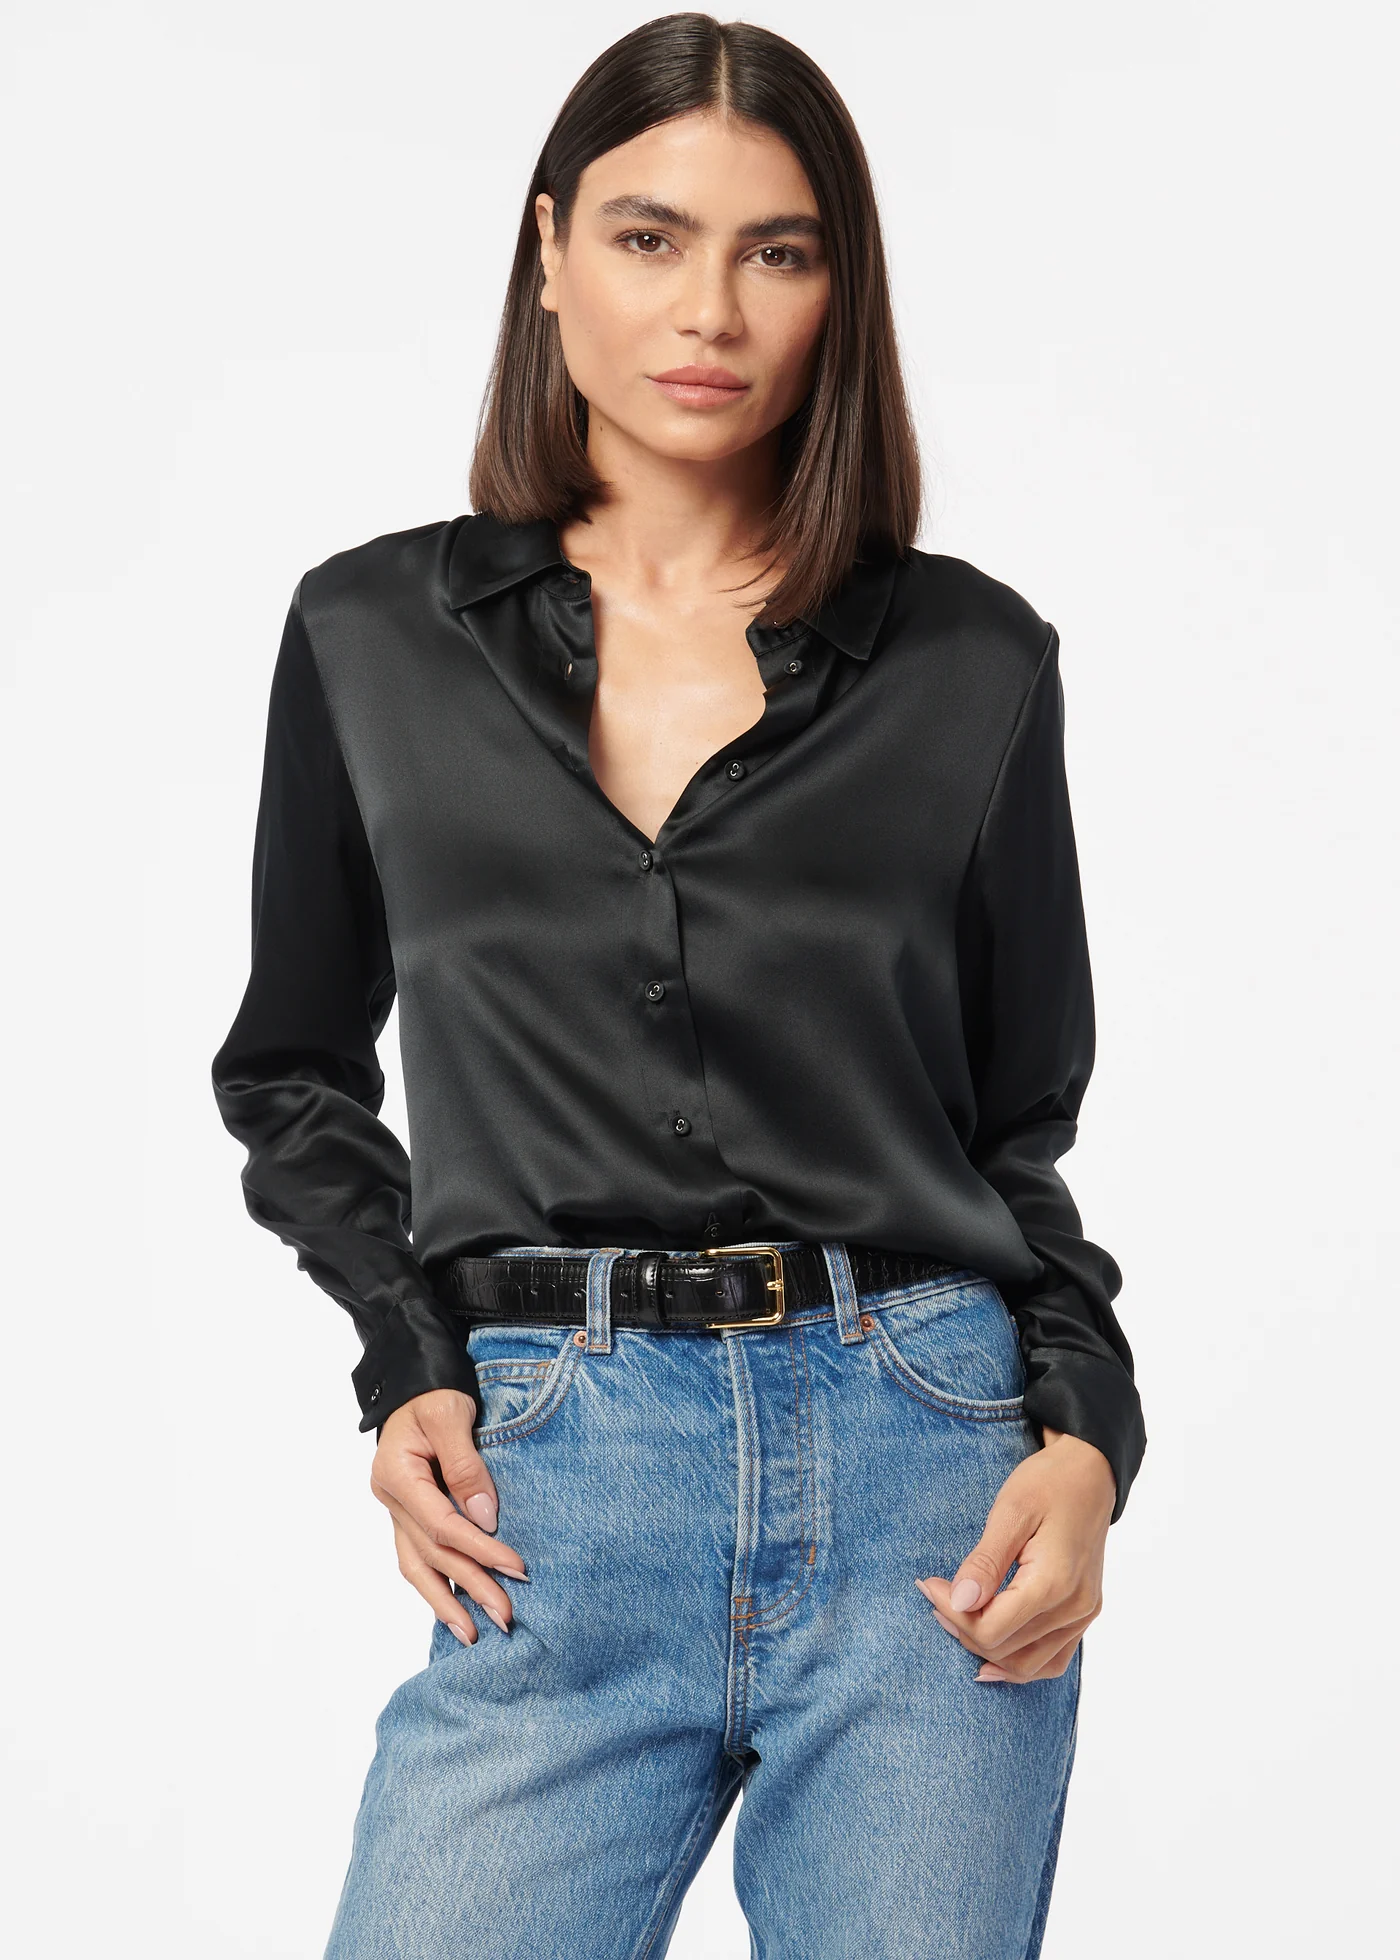 CROSBY BLOUSE IN BLACK - Romi Boutique